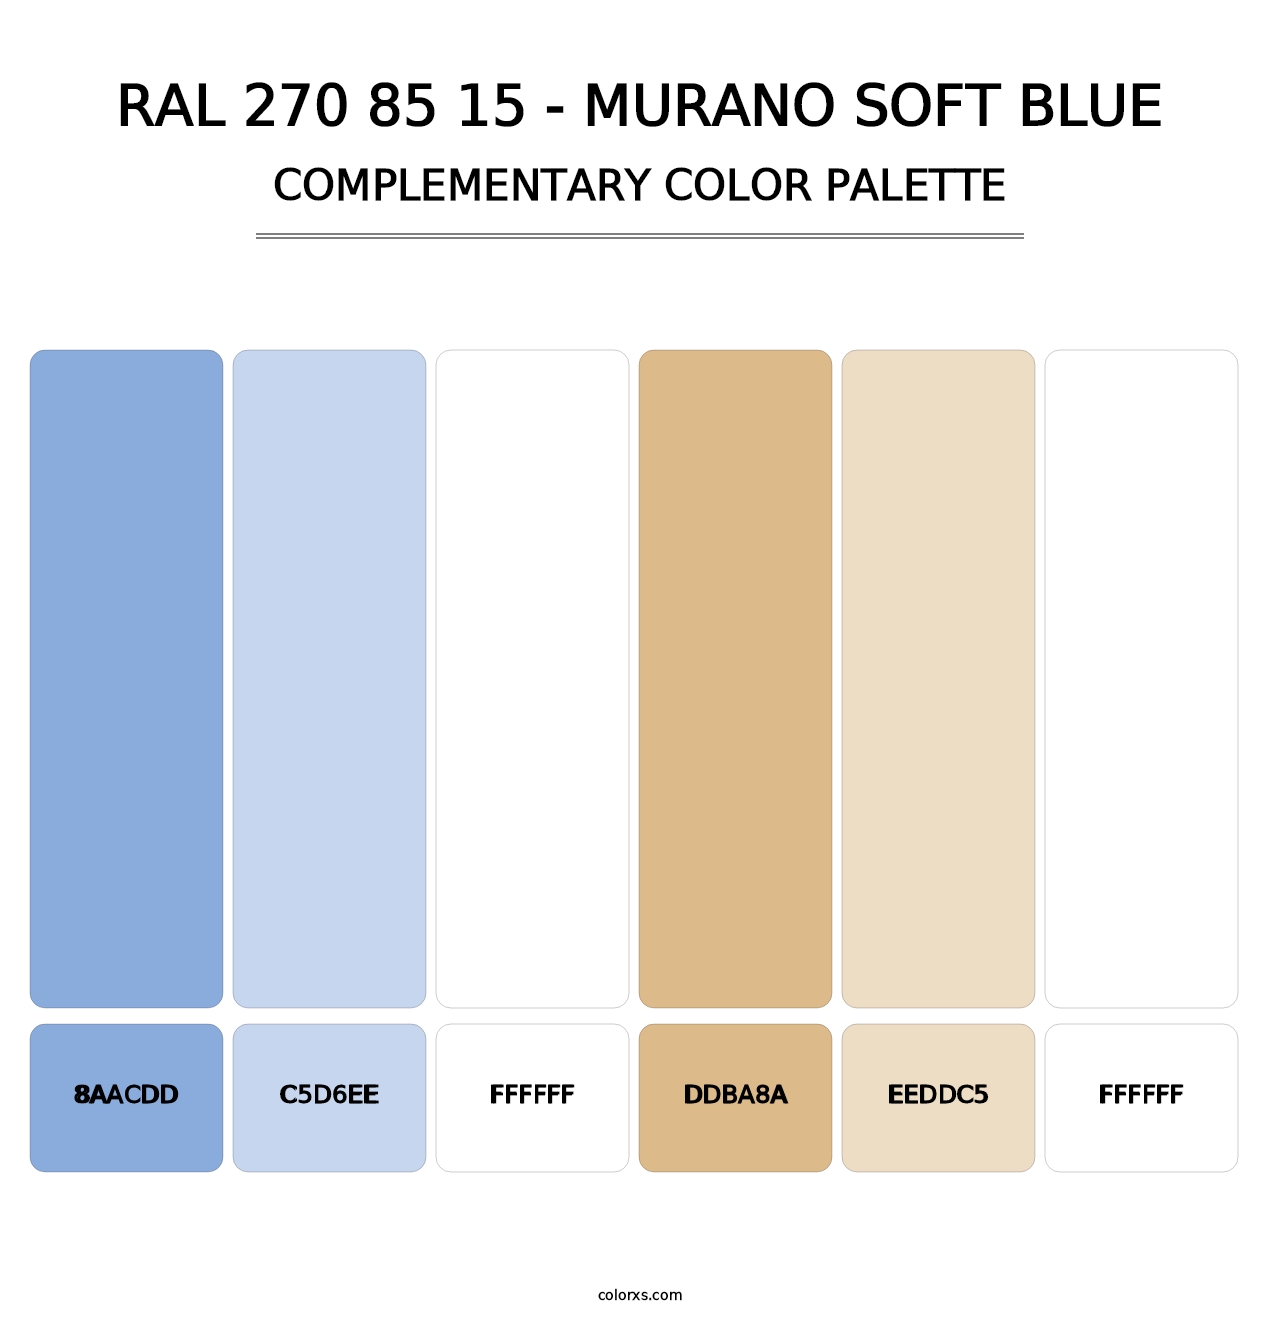 RAL 270 85 15 - Murano Soft Blue - Complementary Color Palette